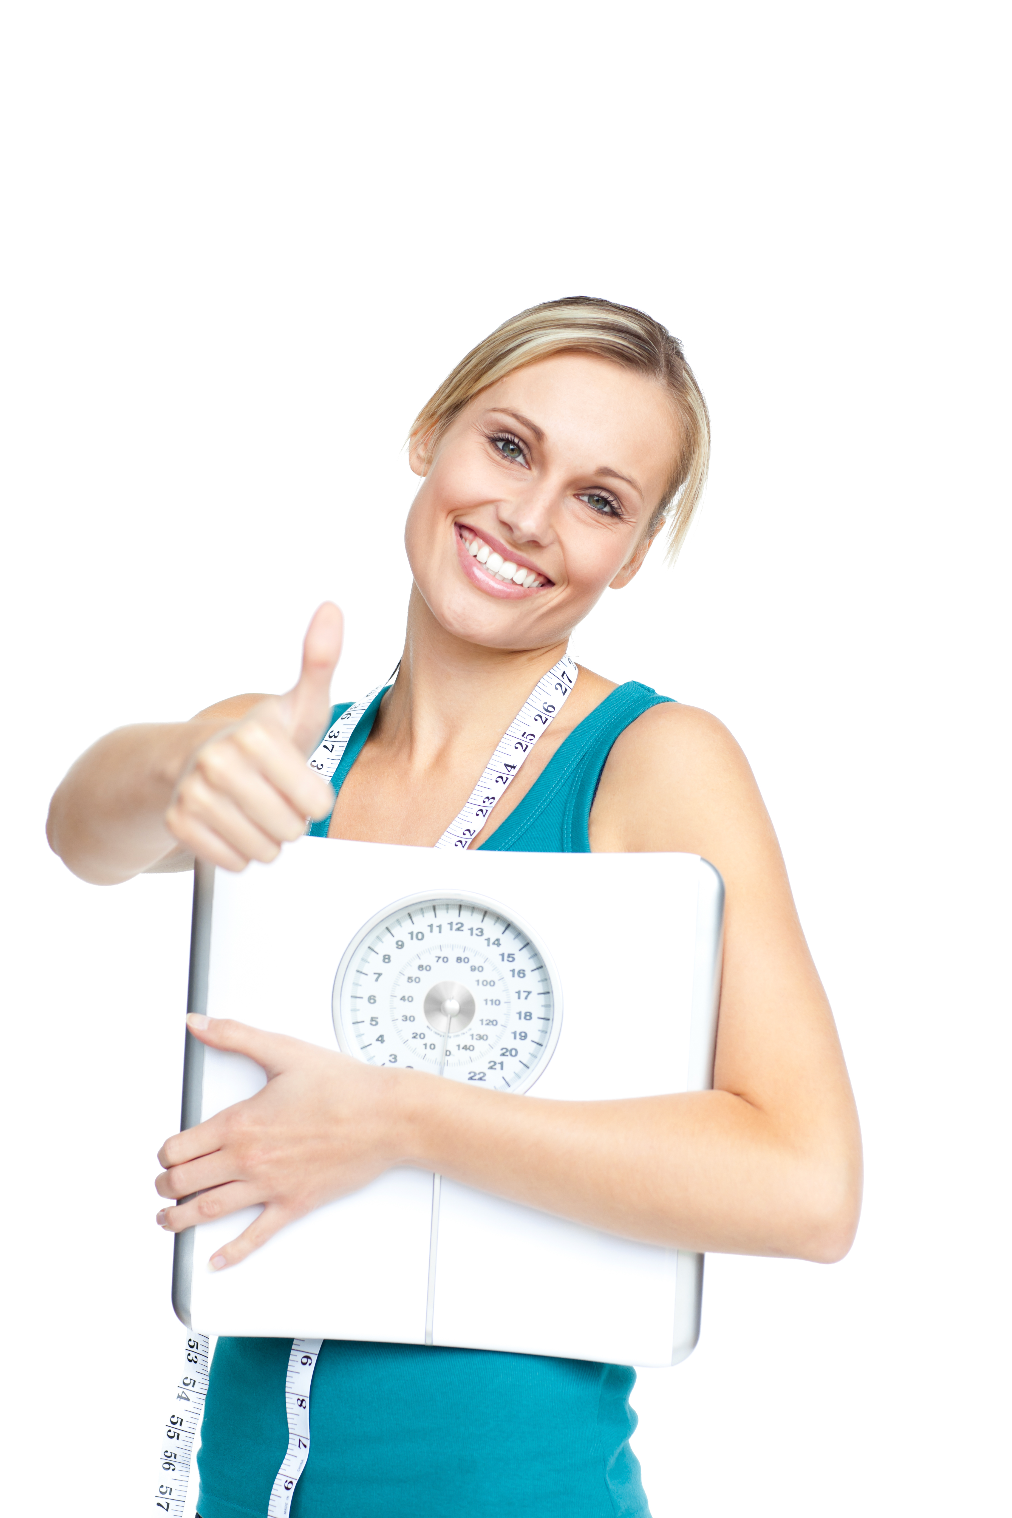 A women with weight machine encouraging weight loss